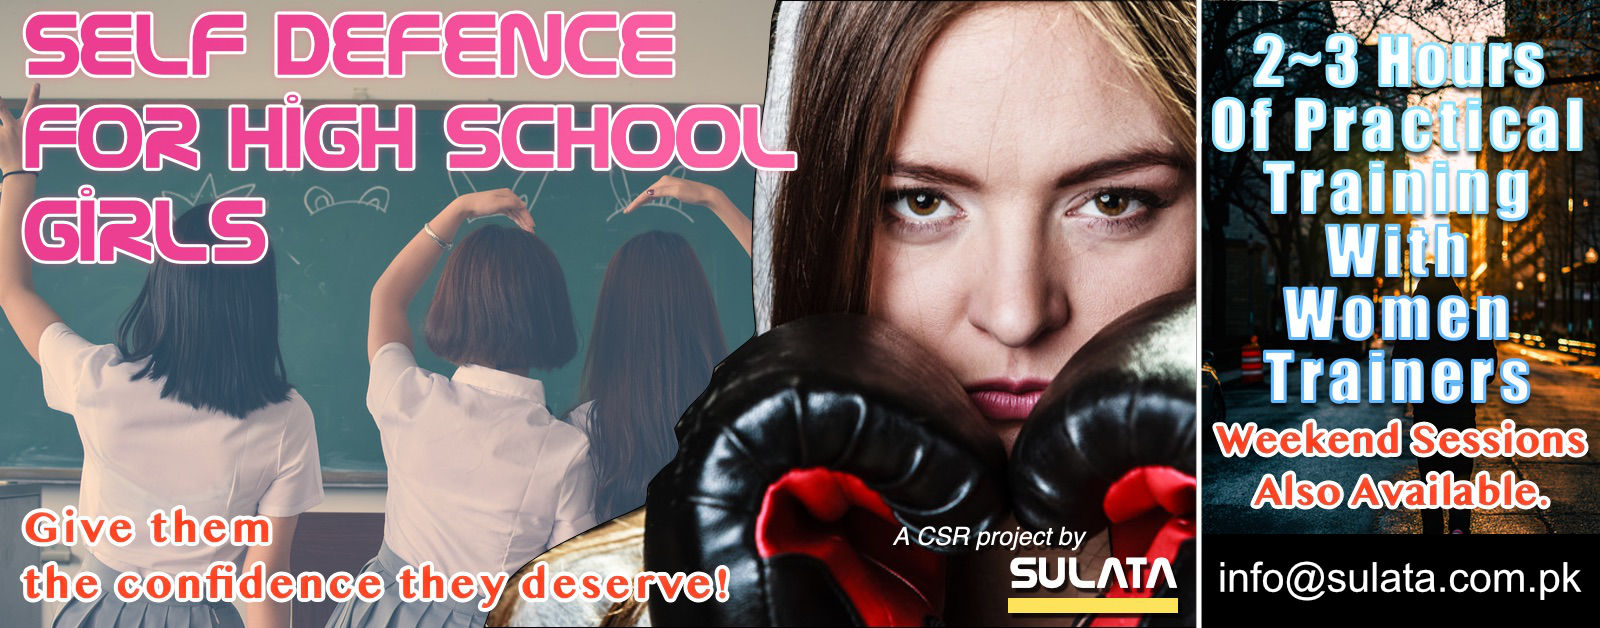 Self Defence for high-school girls